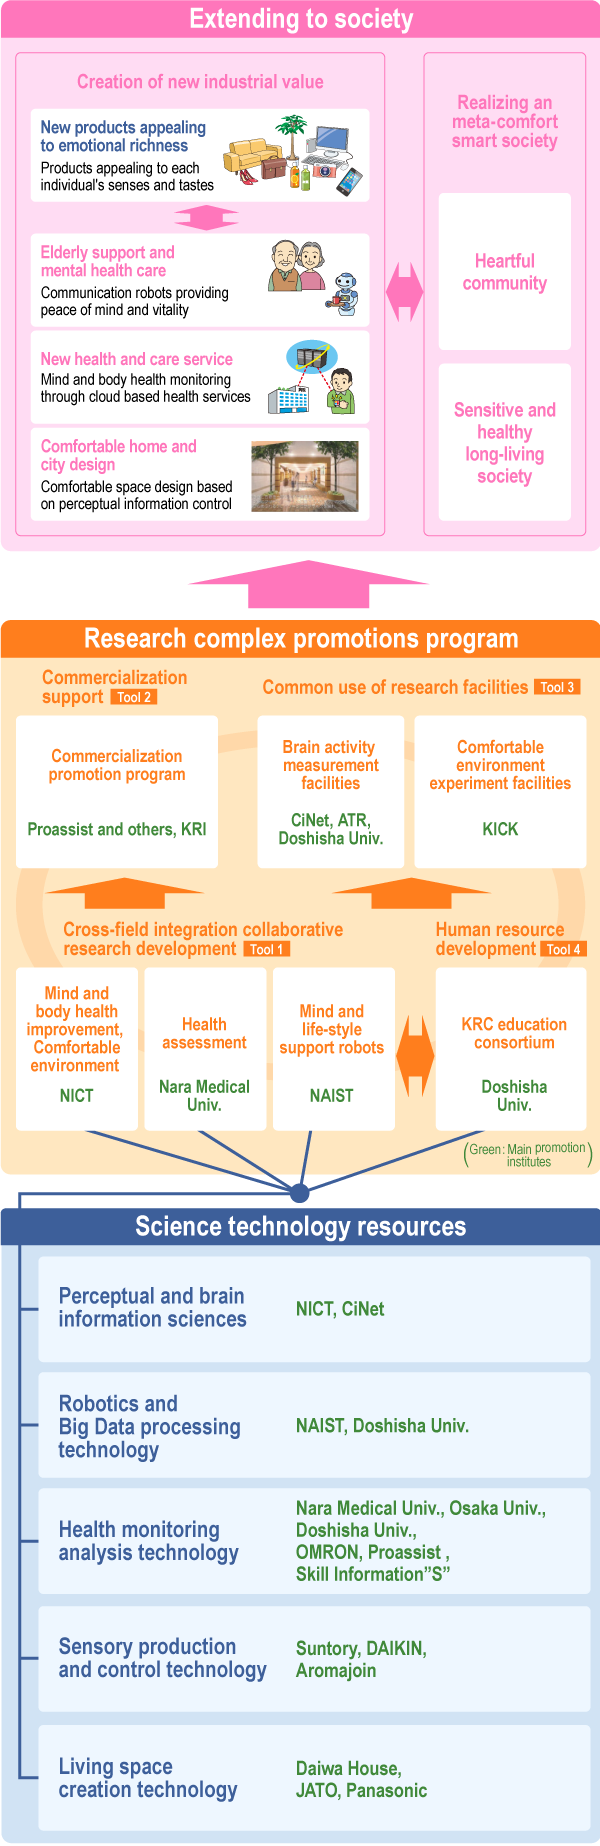 Outline of Keihanna Research-Complex